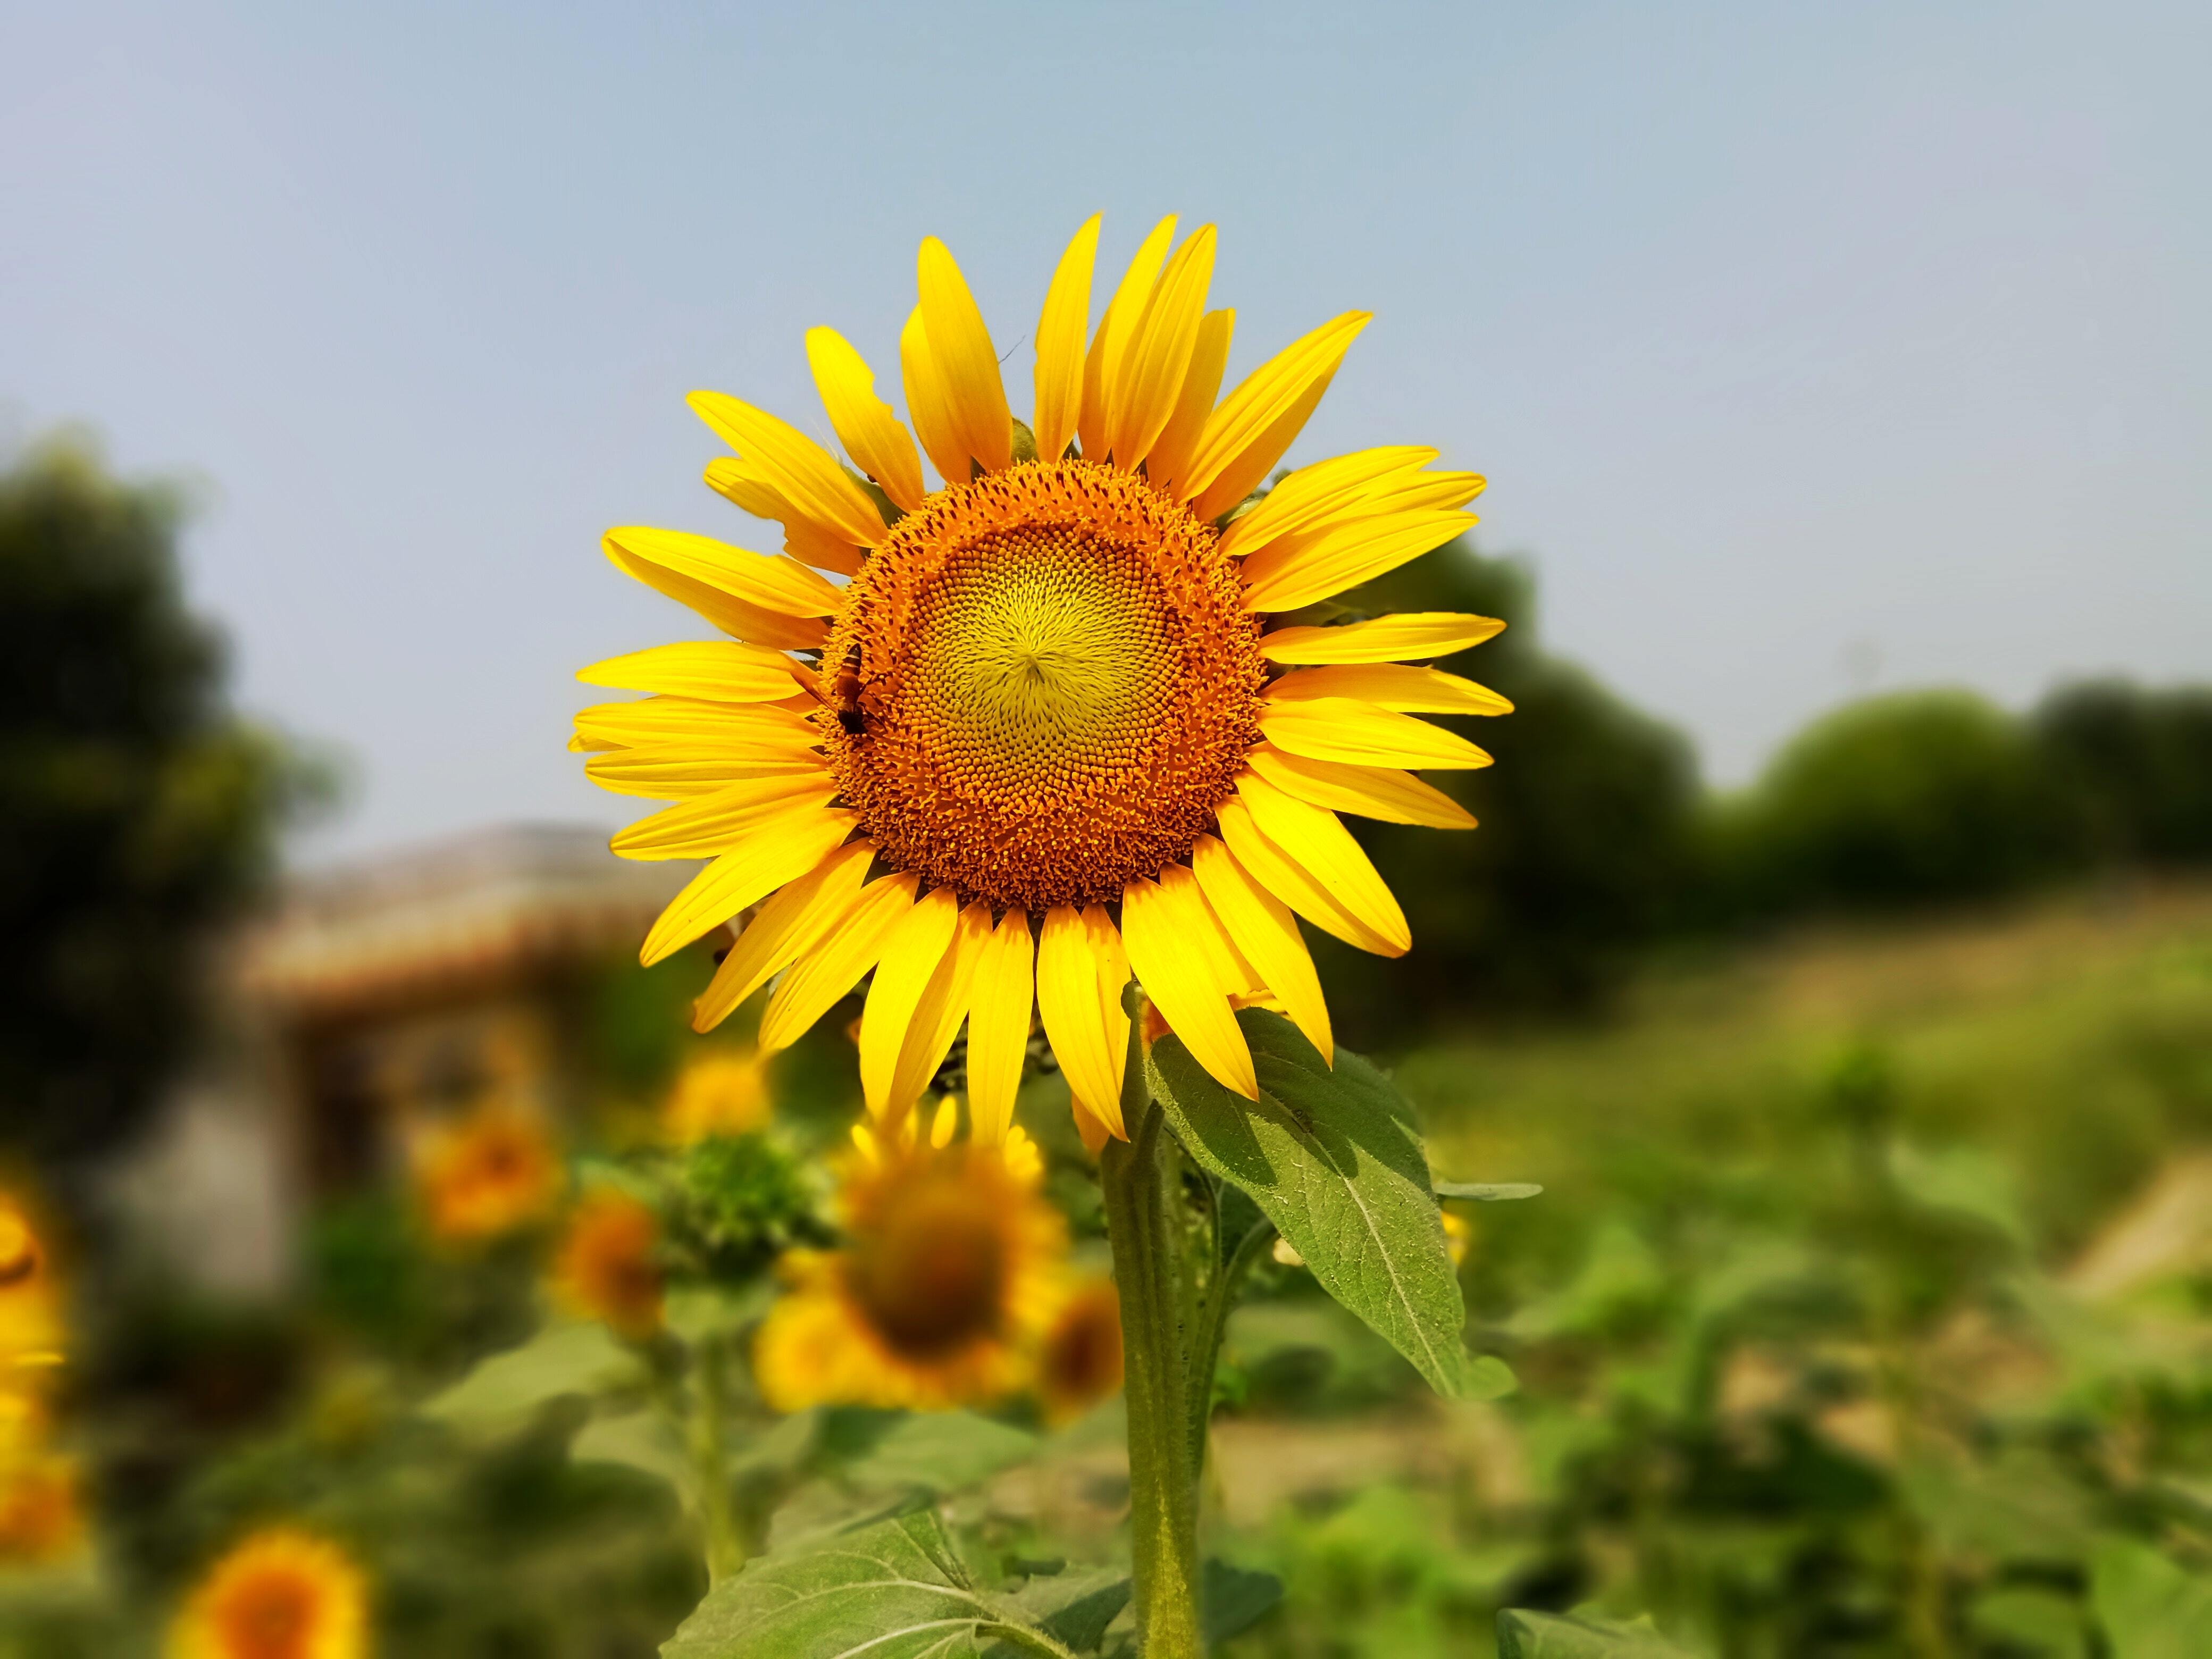 Image: Sunflower, insect, bee, field, blur